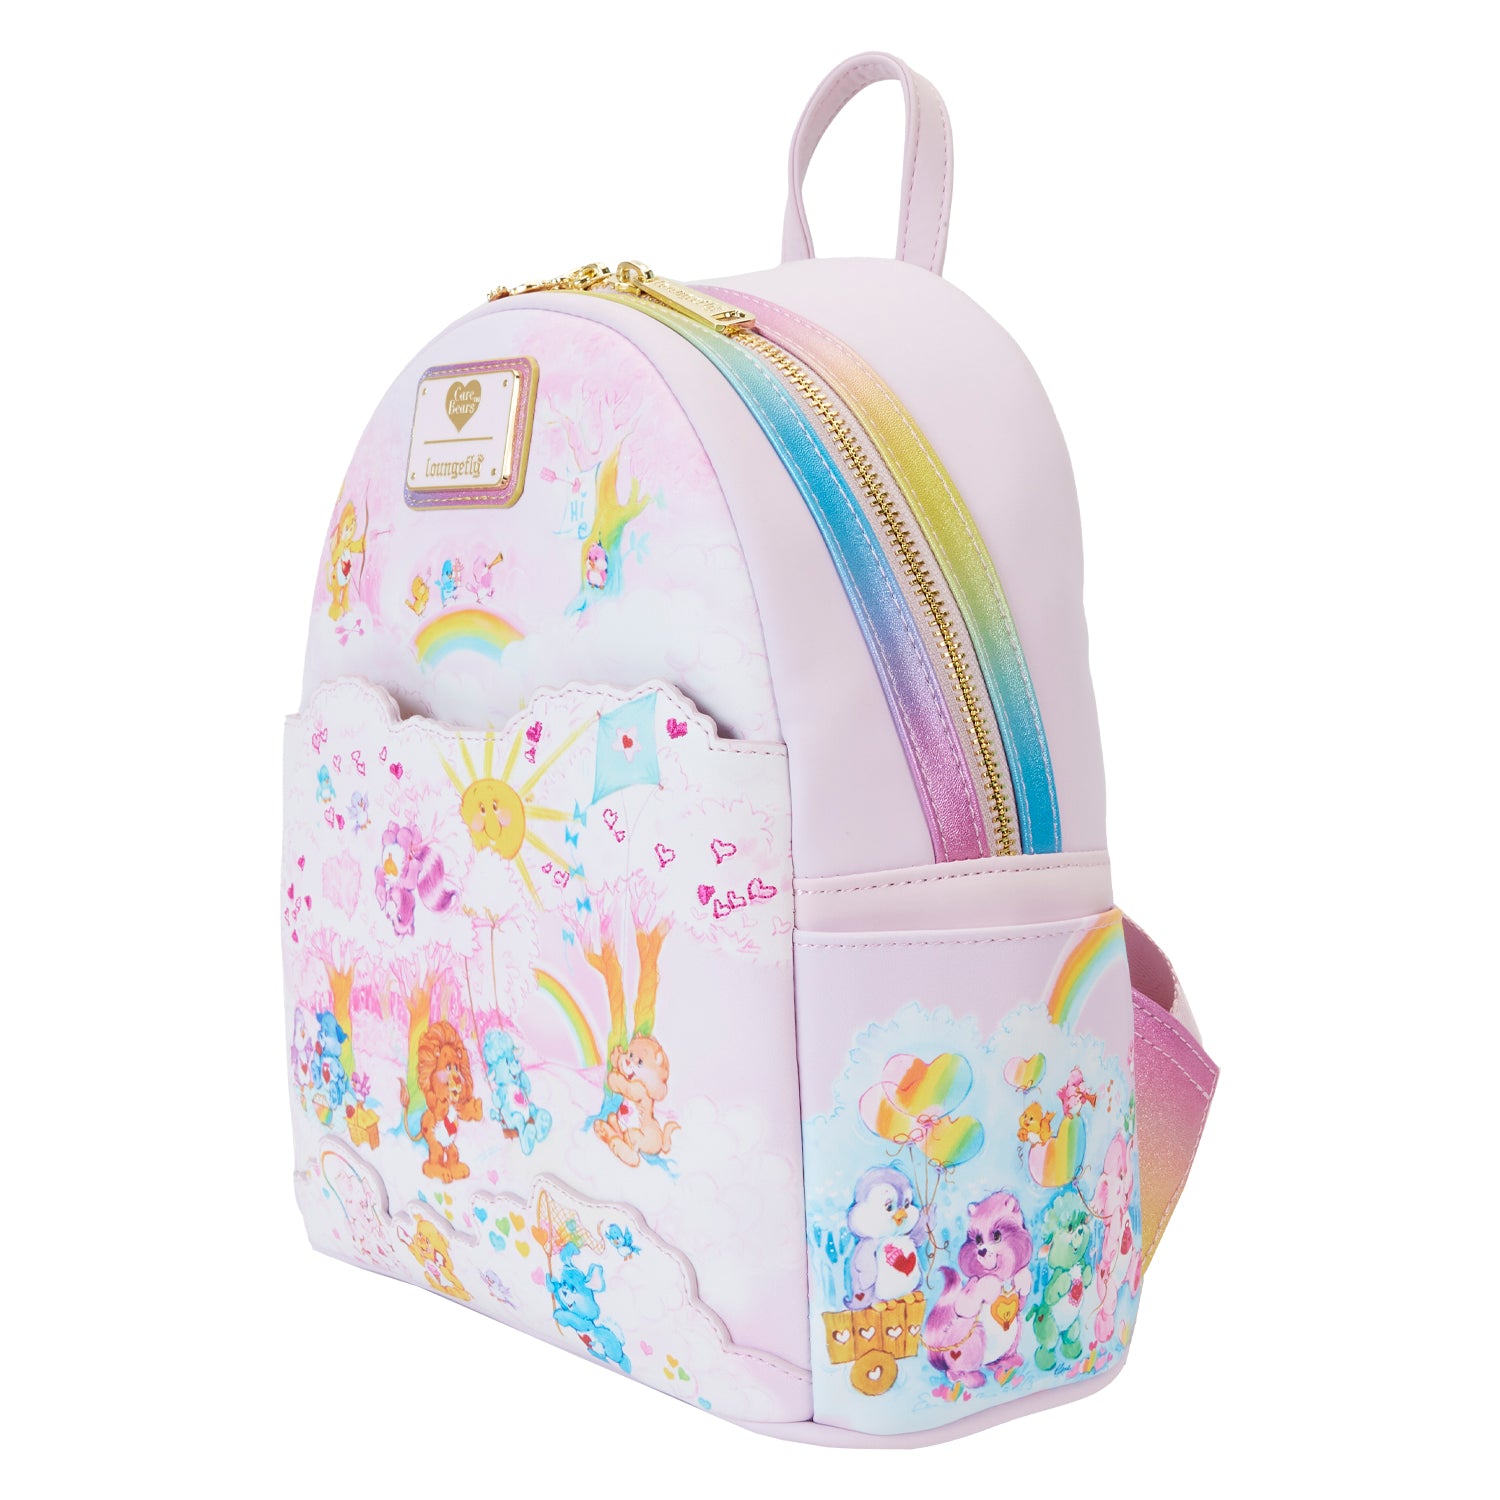 Loungefly Care Bears Cousins Cloud Crew Mini Backpack